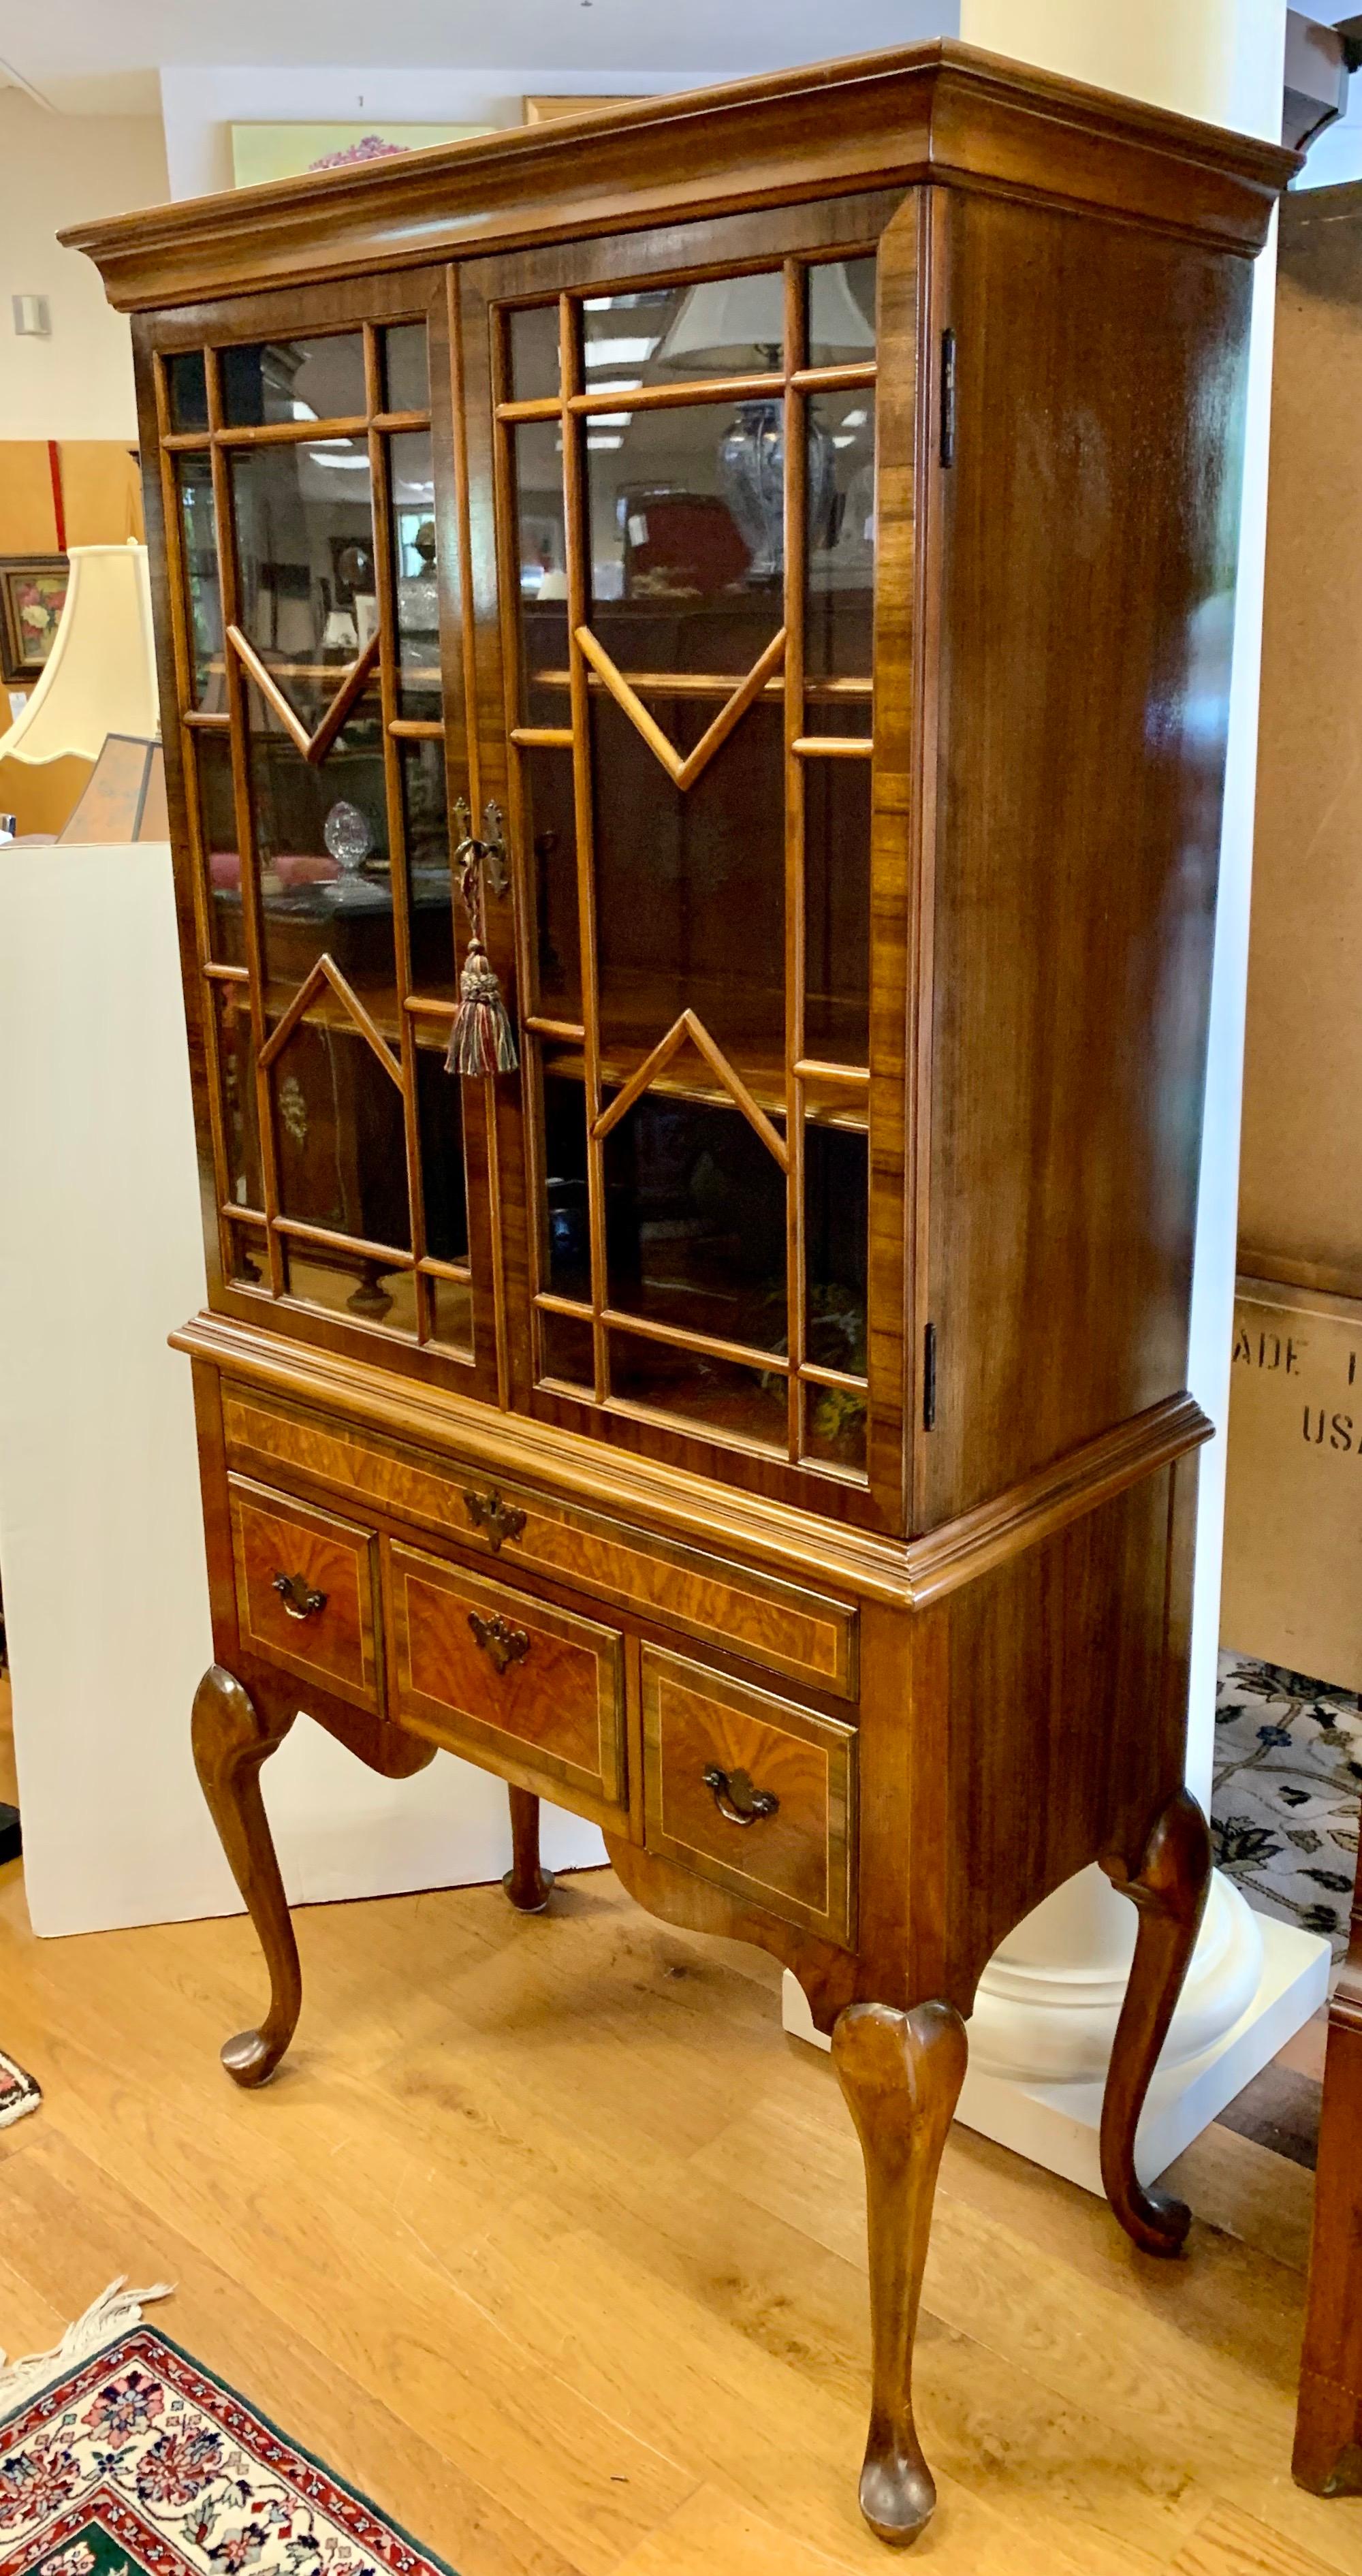 Coveted elegant Chippendale cabinet that can be used in a dining room, den, living room or library.
The finest mahogany and glass. Two piece construction. Nothing short of gorgeous.
  